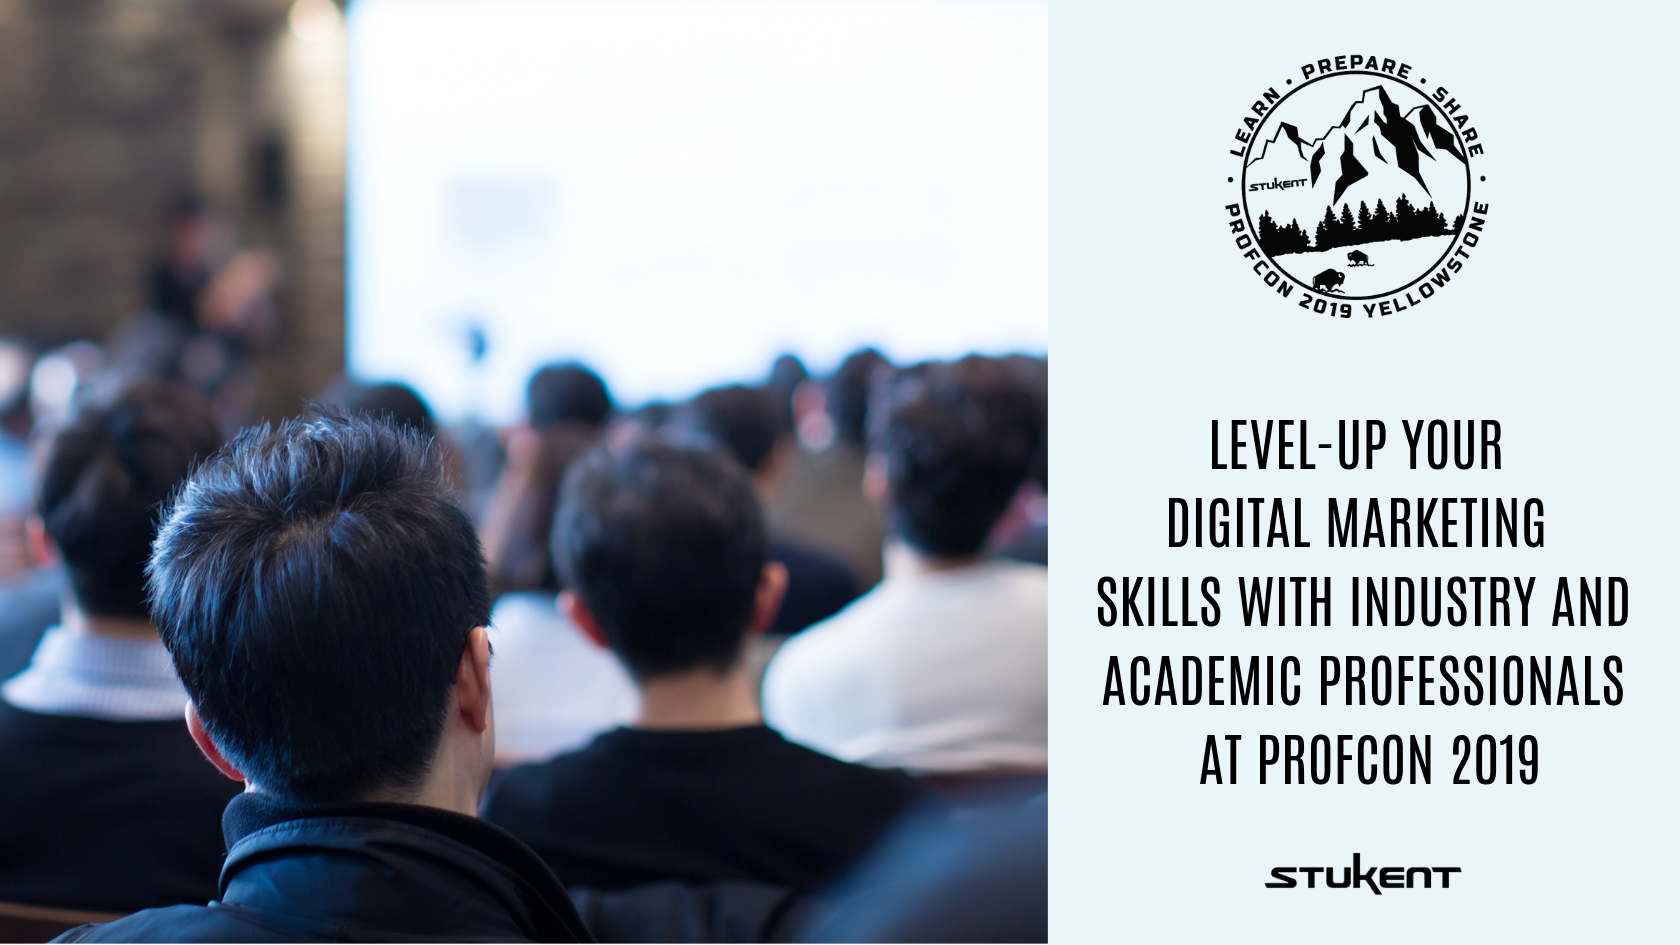 Level-up Your Digital Marketing Skills with Industry and Academic Professionals at ProfCon 2019